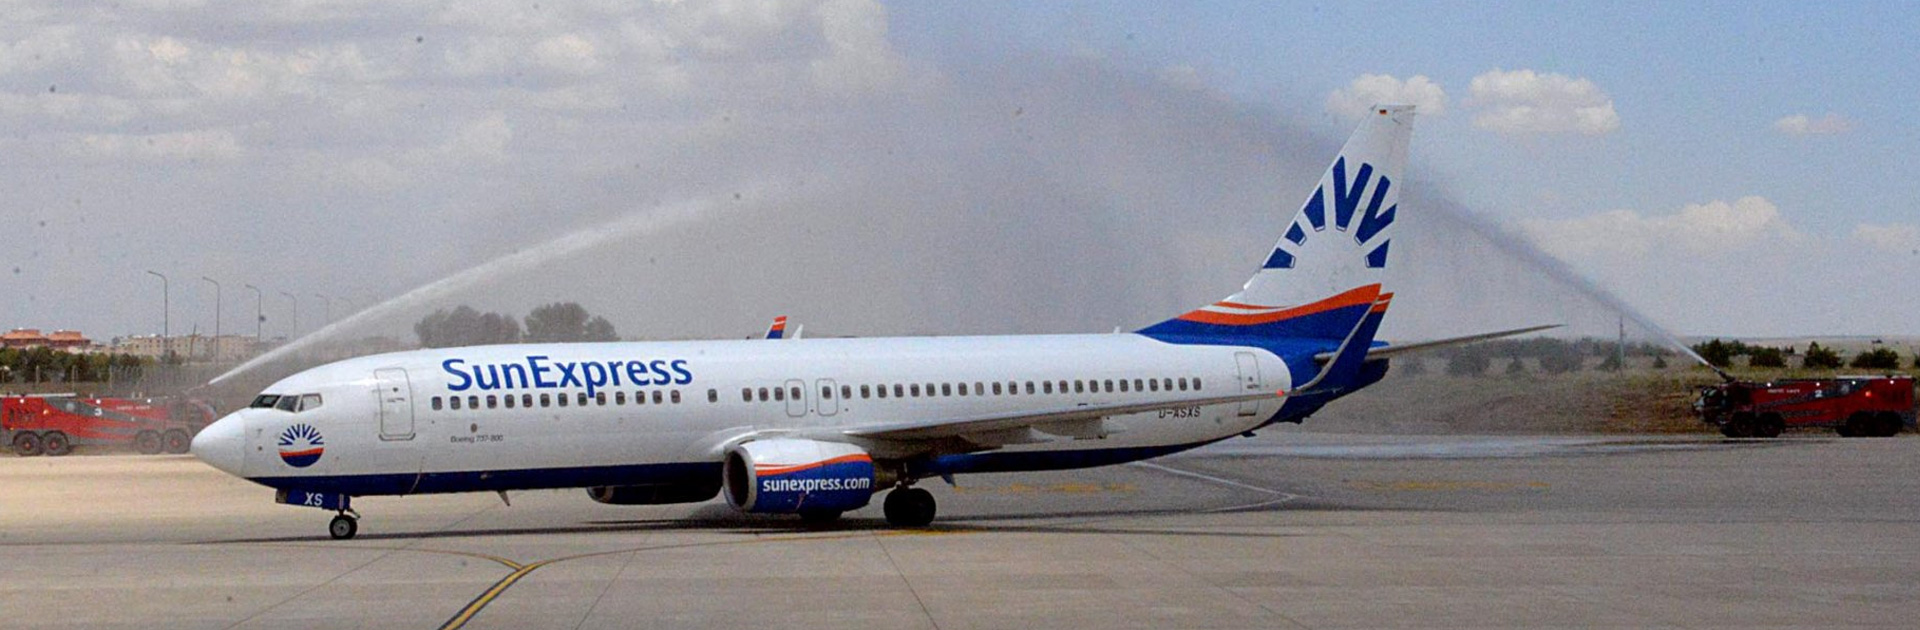 SunExpress SAP Electronic Account Statement Project Kicked-off